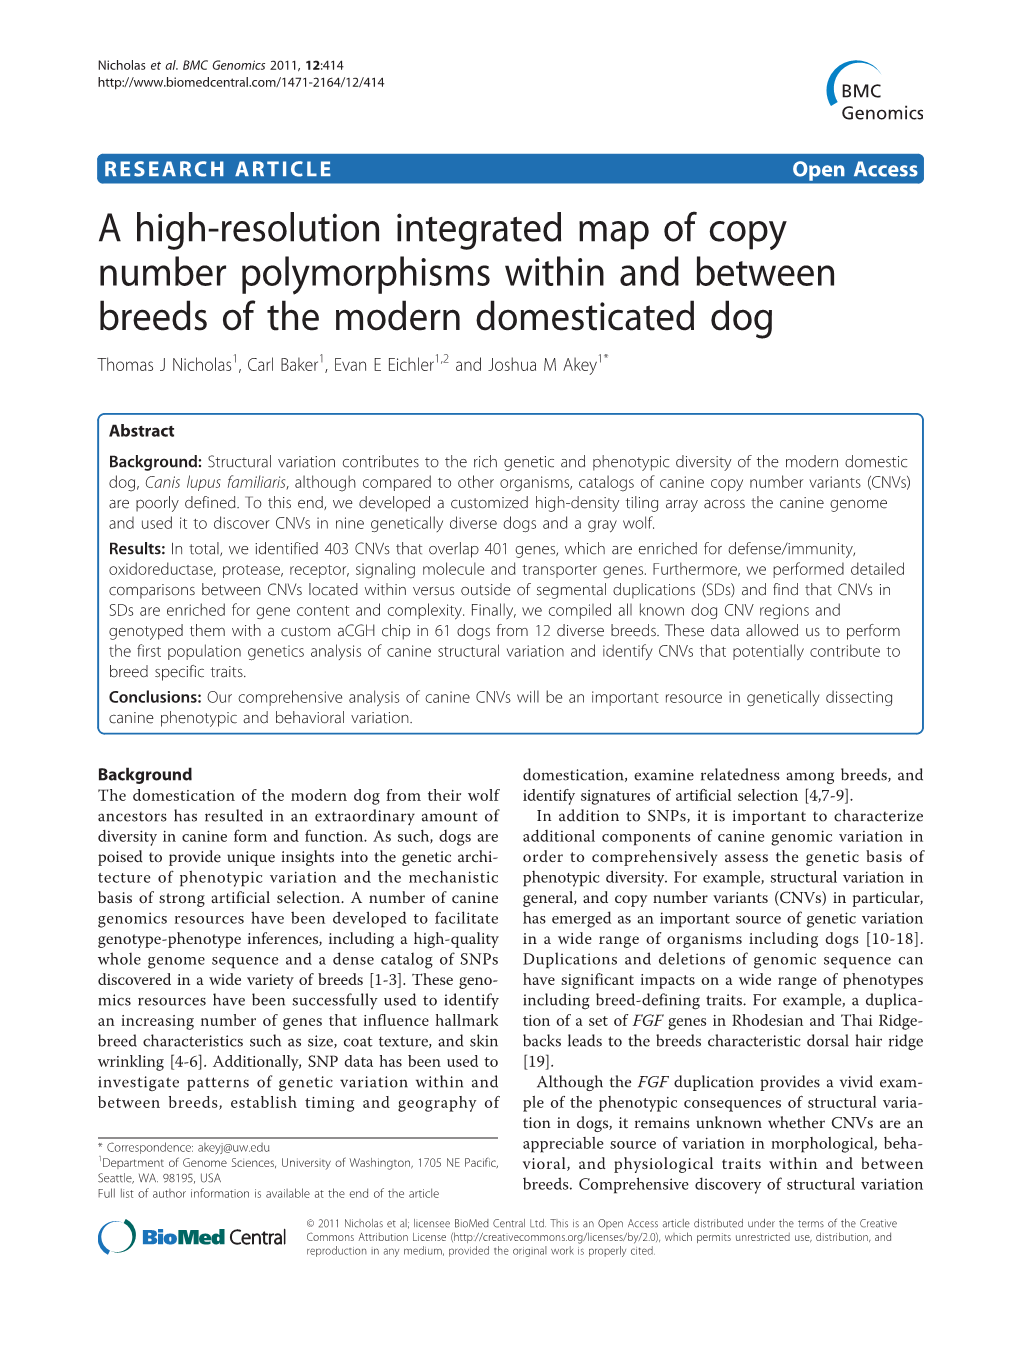 A High-Resolution Integrated Map of Copy Number Polymorphisms Within